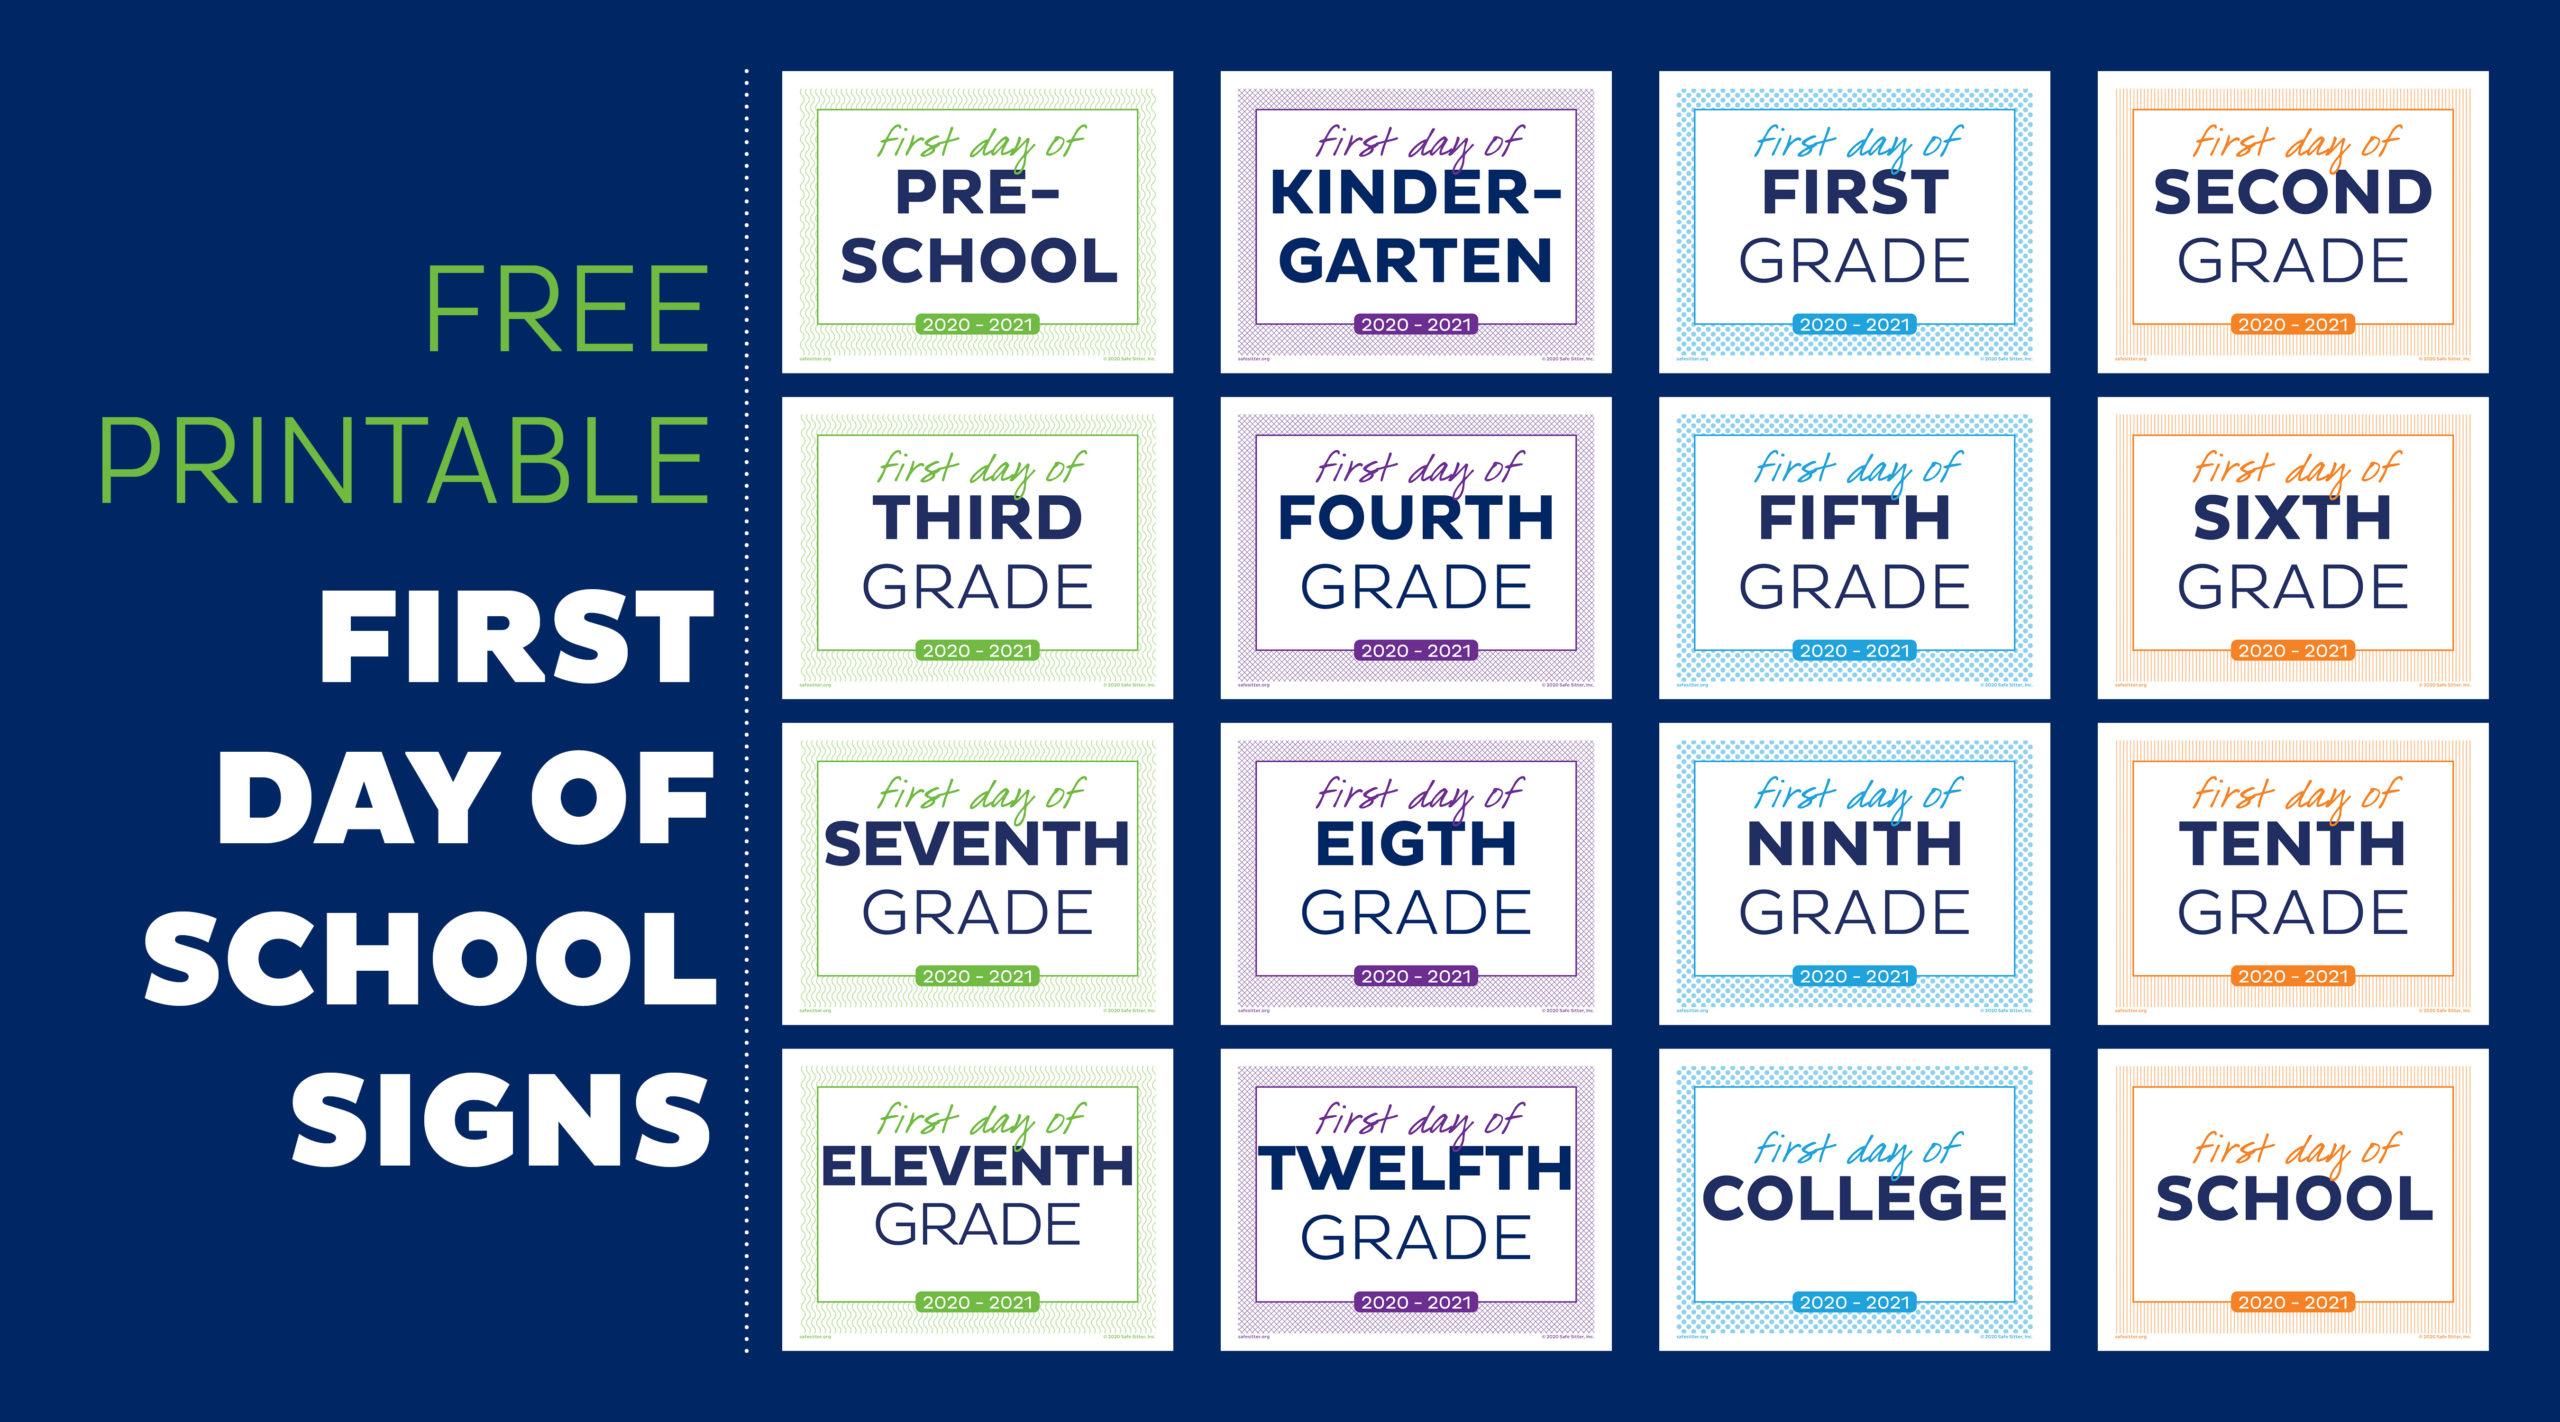 free-printable-first-day-of-virtual-school-signs-2022-2022